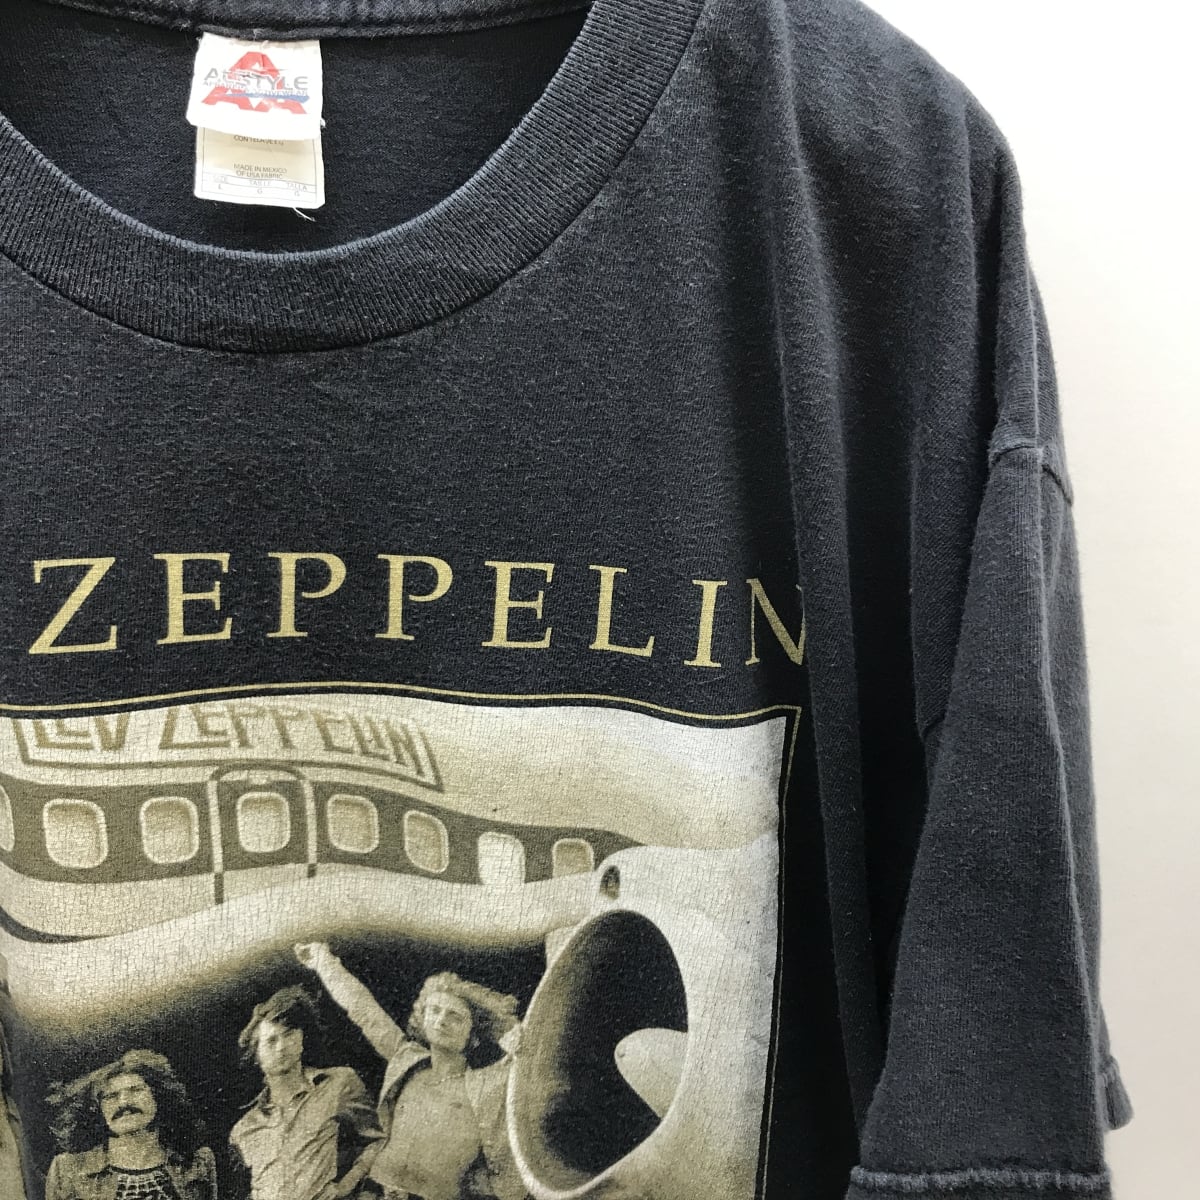 APPAREL & ACTIVEWEAR アルスタイル LED ZEPPELIN AIRPLANE STARSHIP